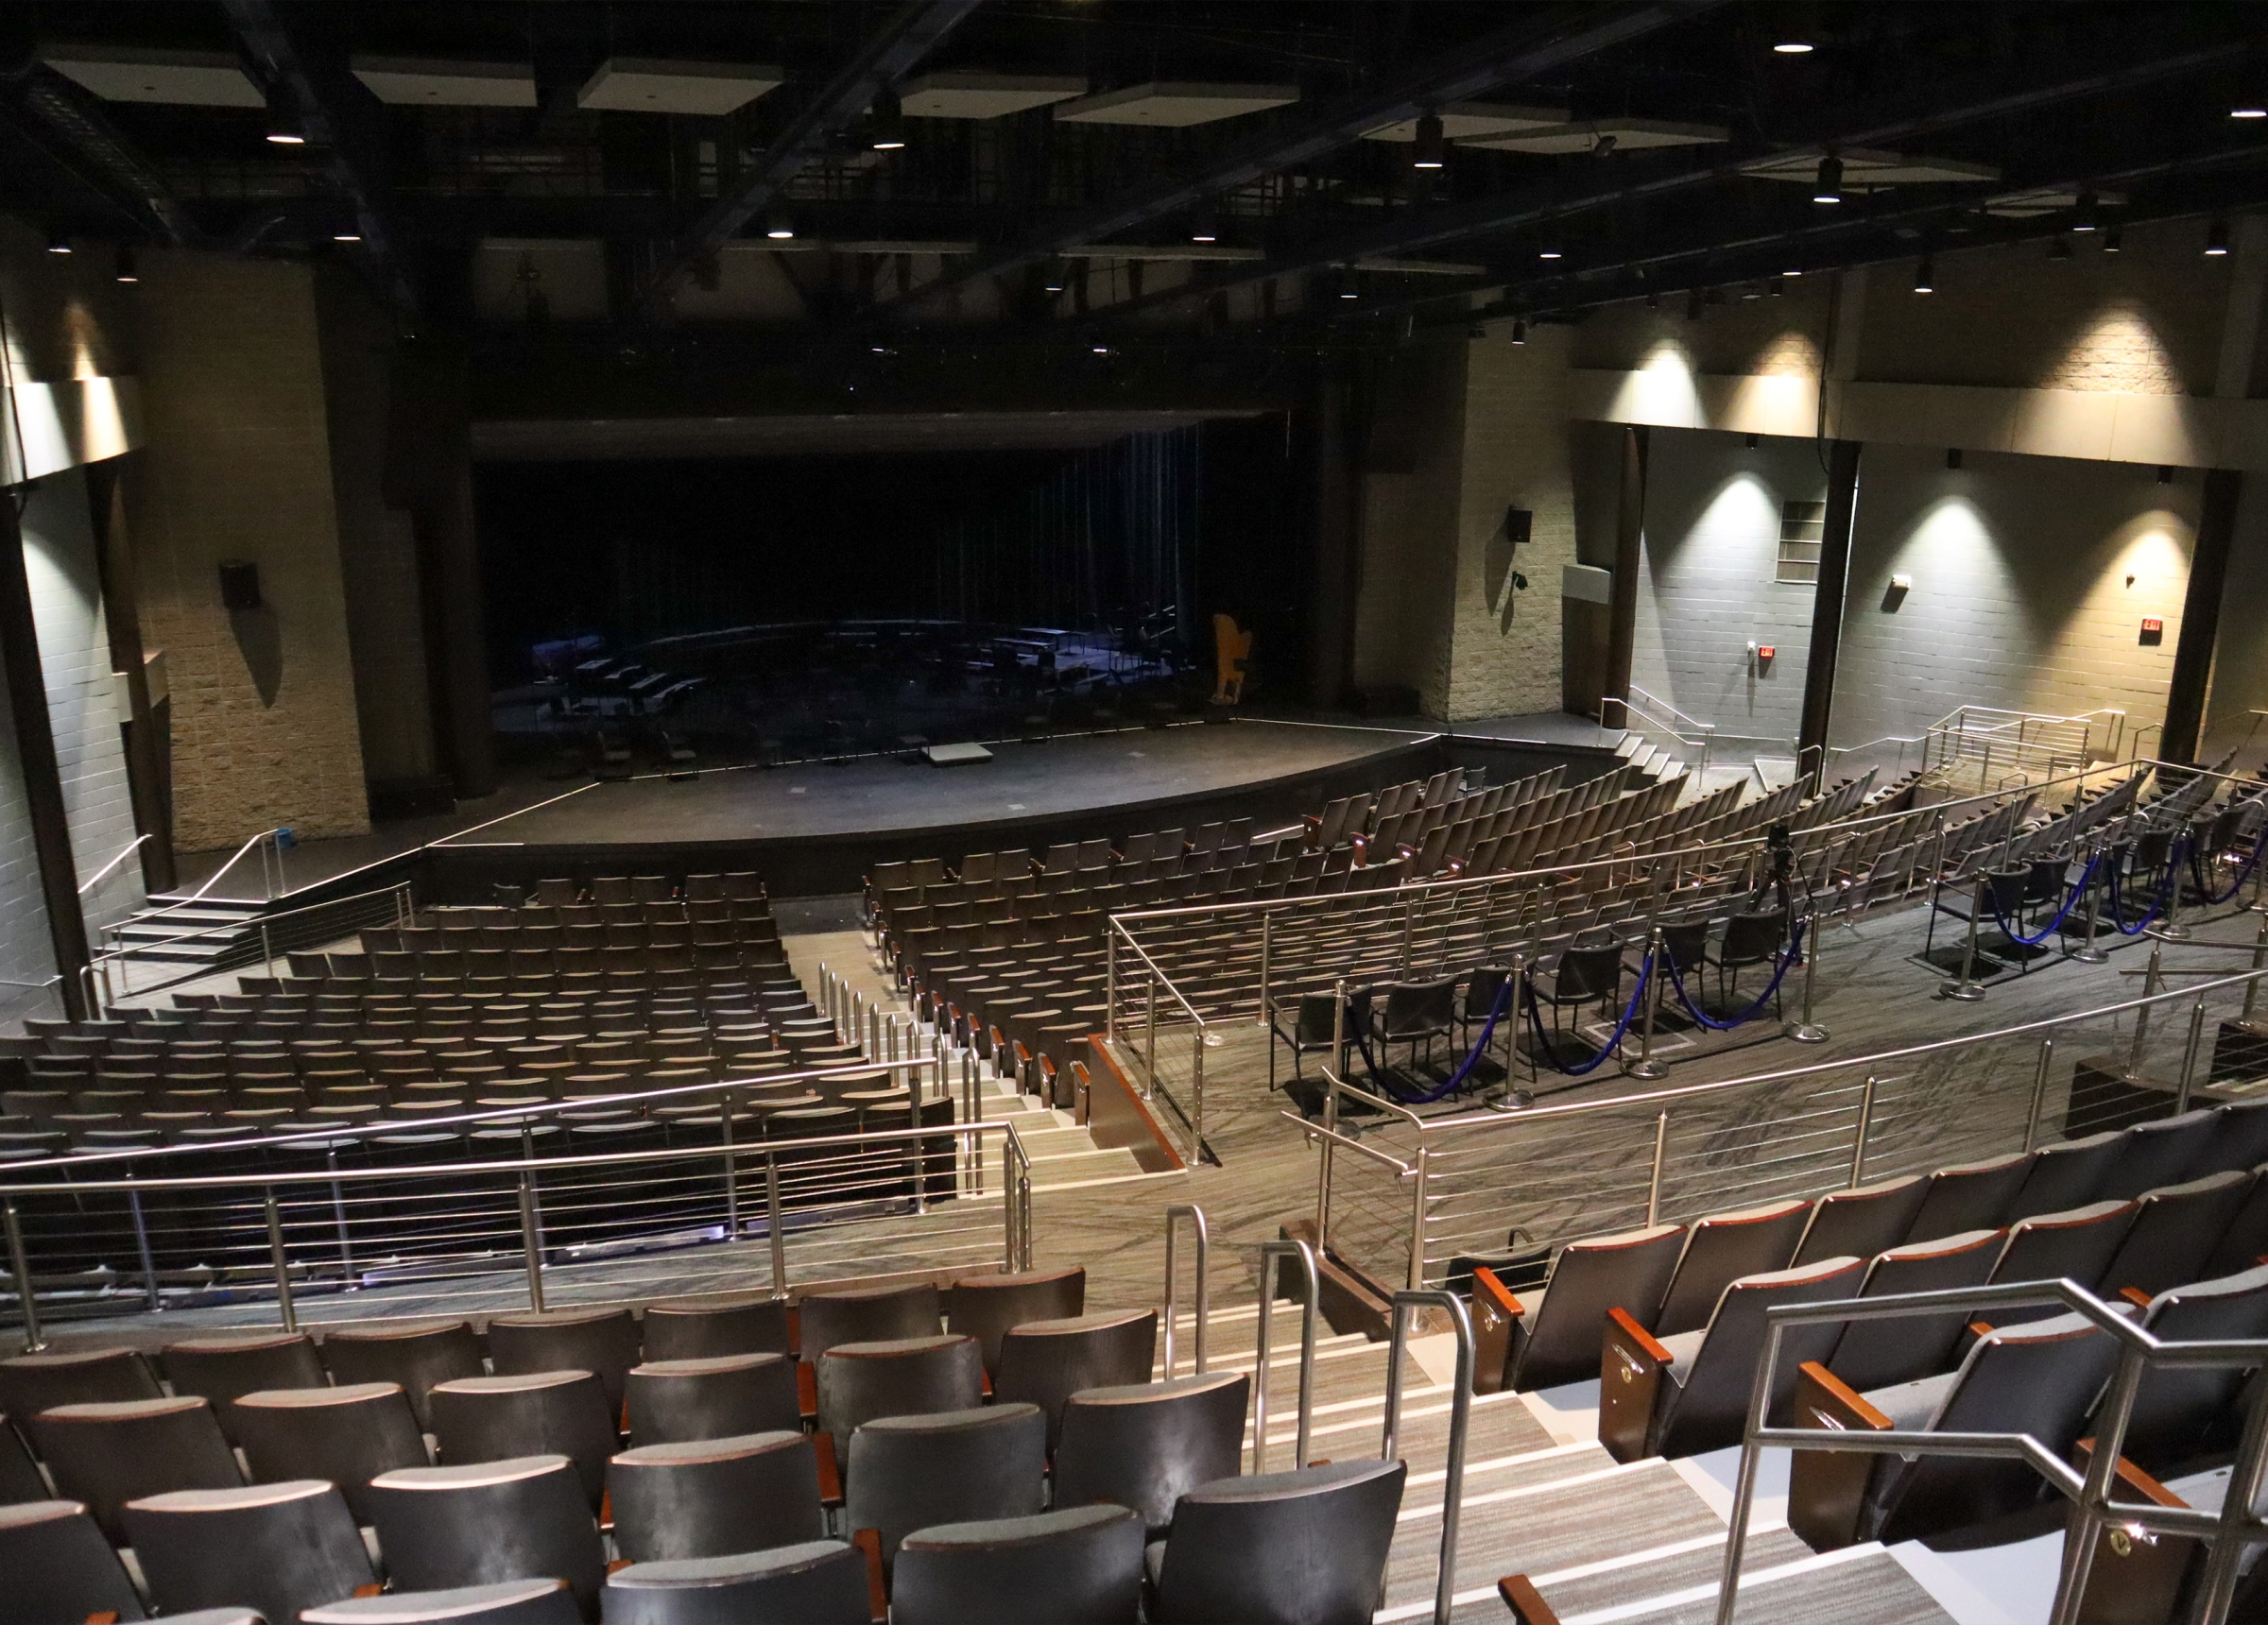 Ferst Center theater stage from audience view